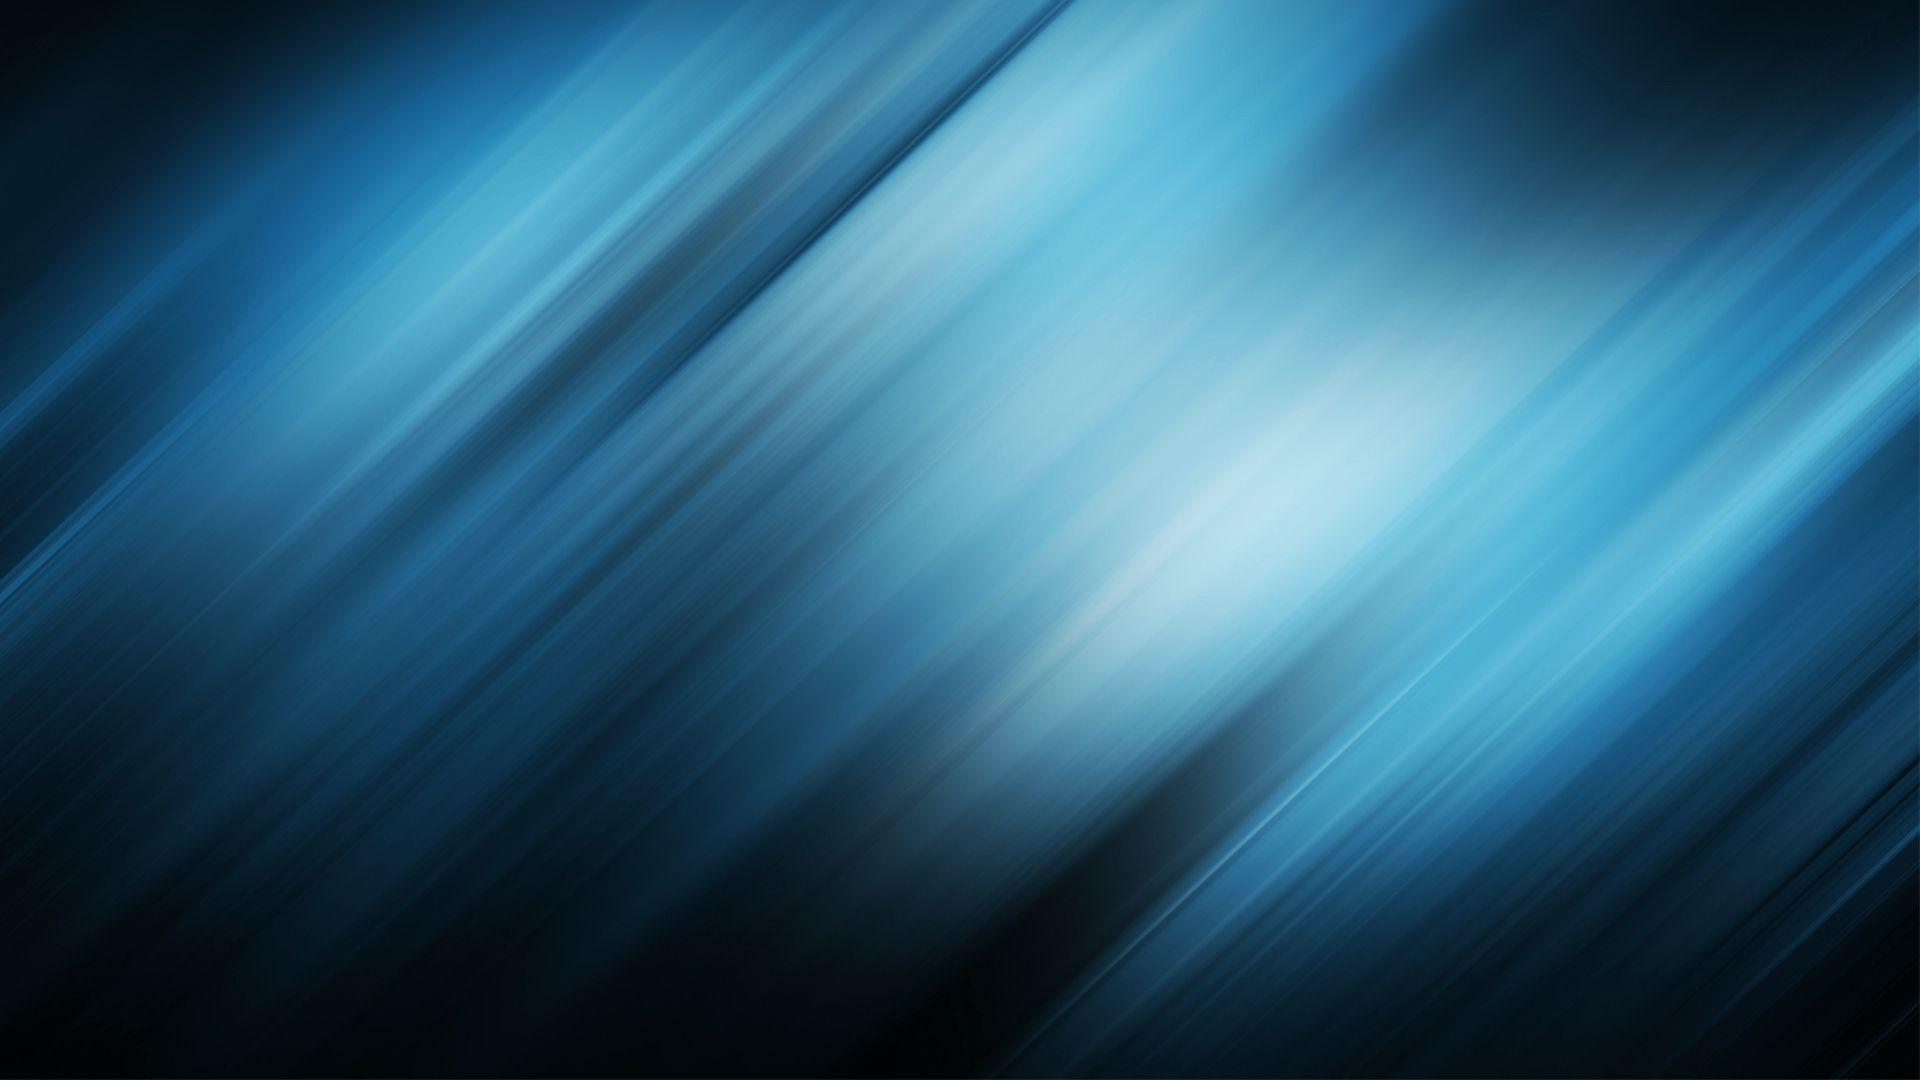 Abstract Wind Wallpaper 29093 1920x1080 px